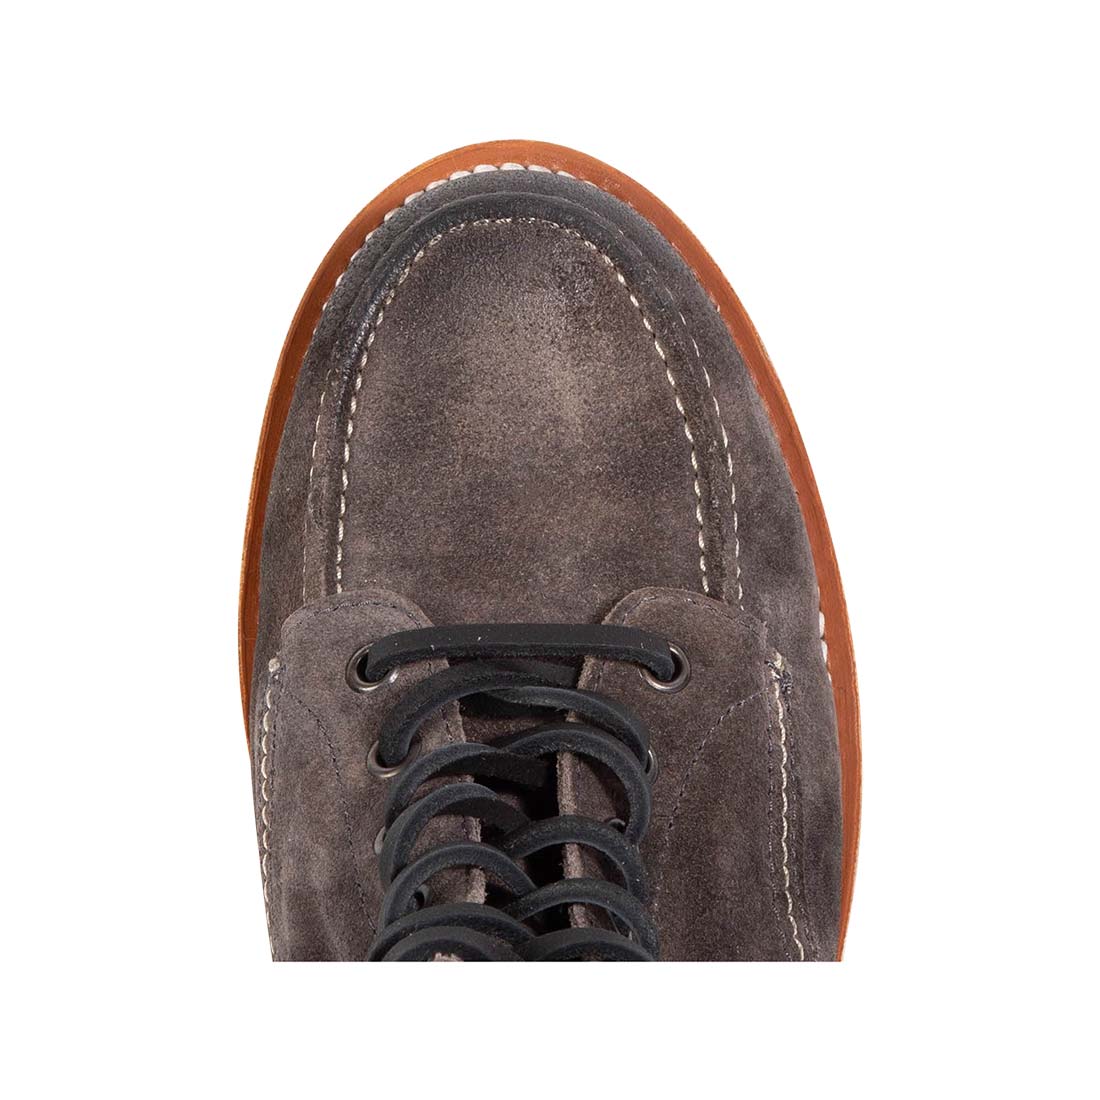 Top view showing round toe and leather lacing on FREEBIRD men's Carbon grey suede shoe